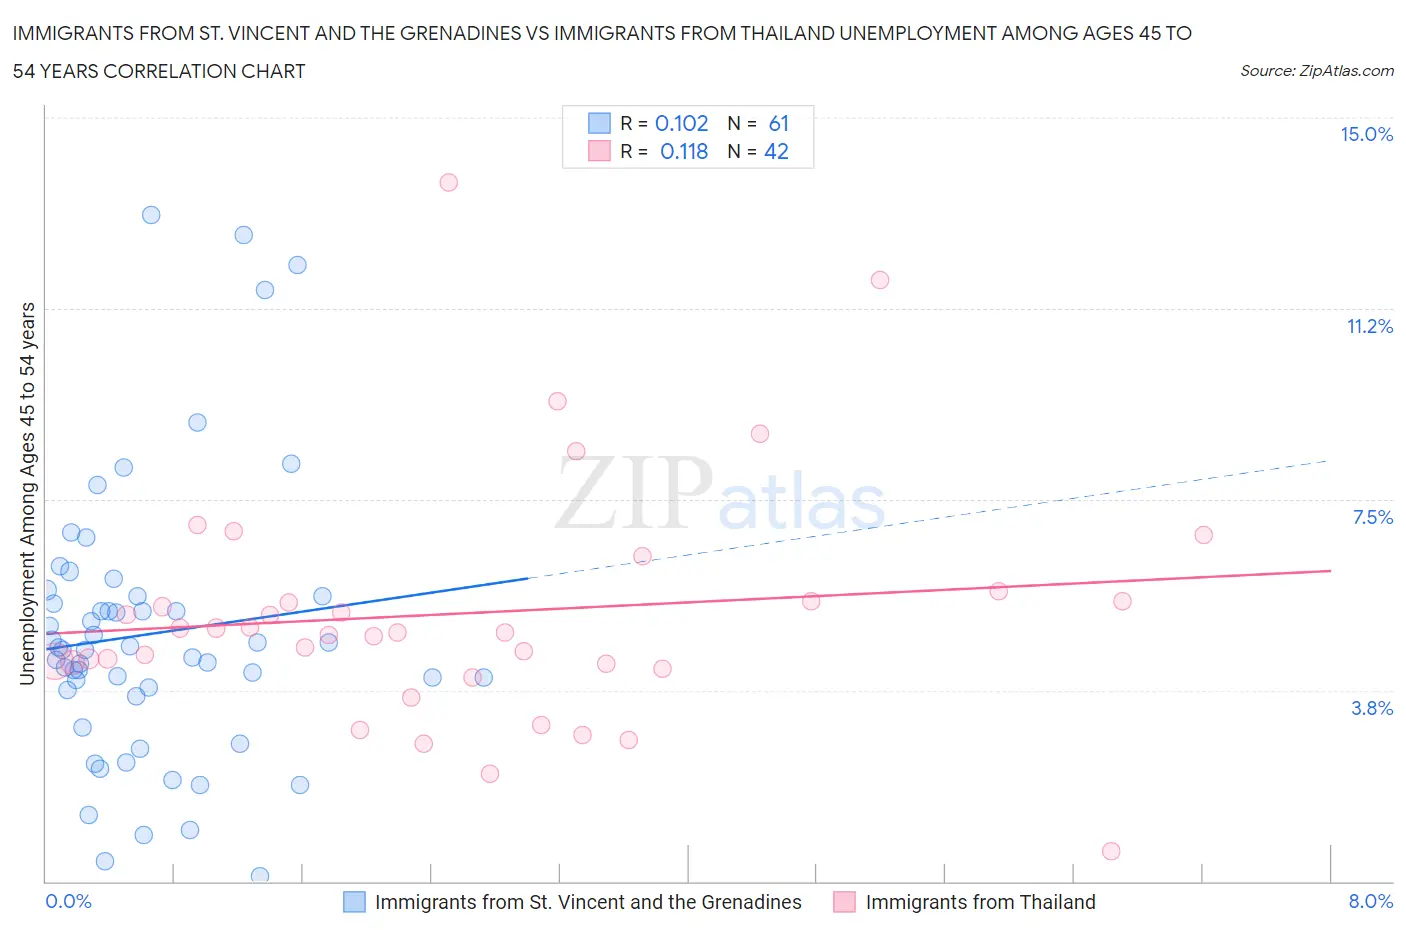 Immigrants from St. Vincent and the Grenadines vs Immigrants from Thailand Unemployment Among Ages 45 to 54 years